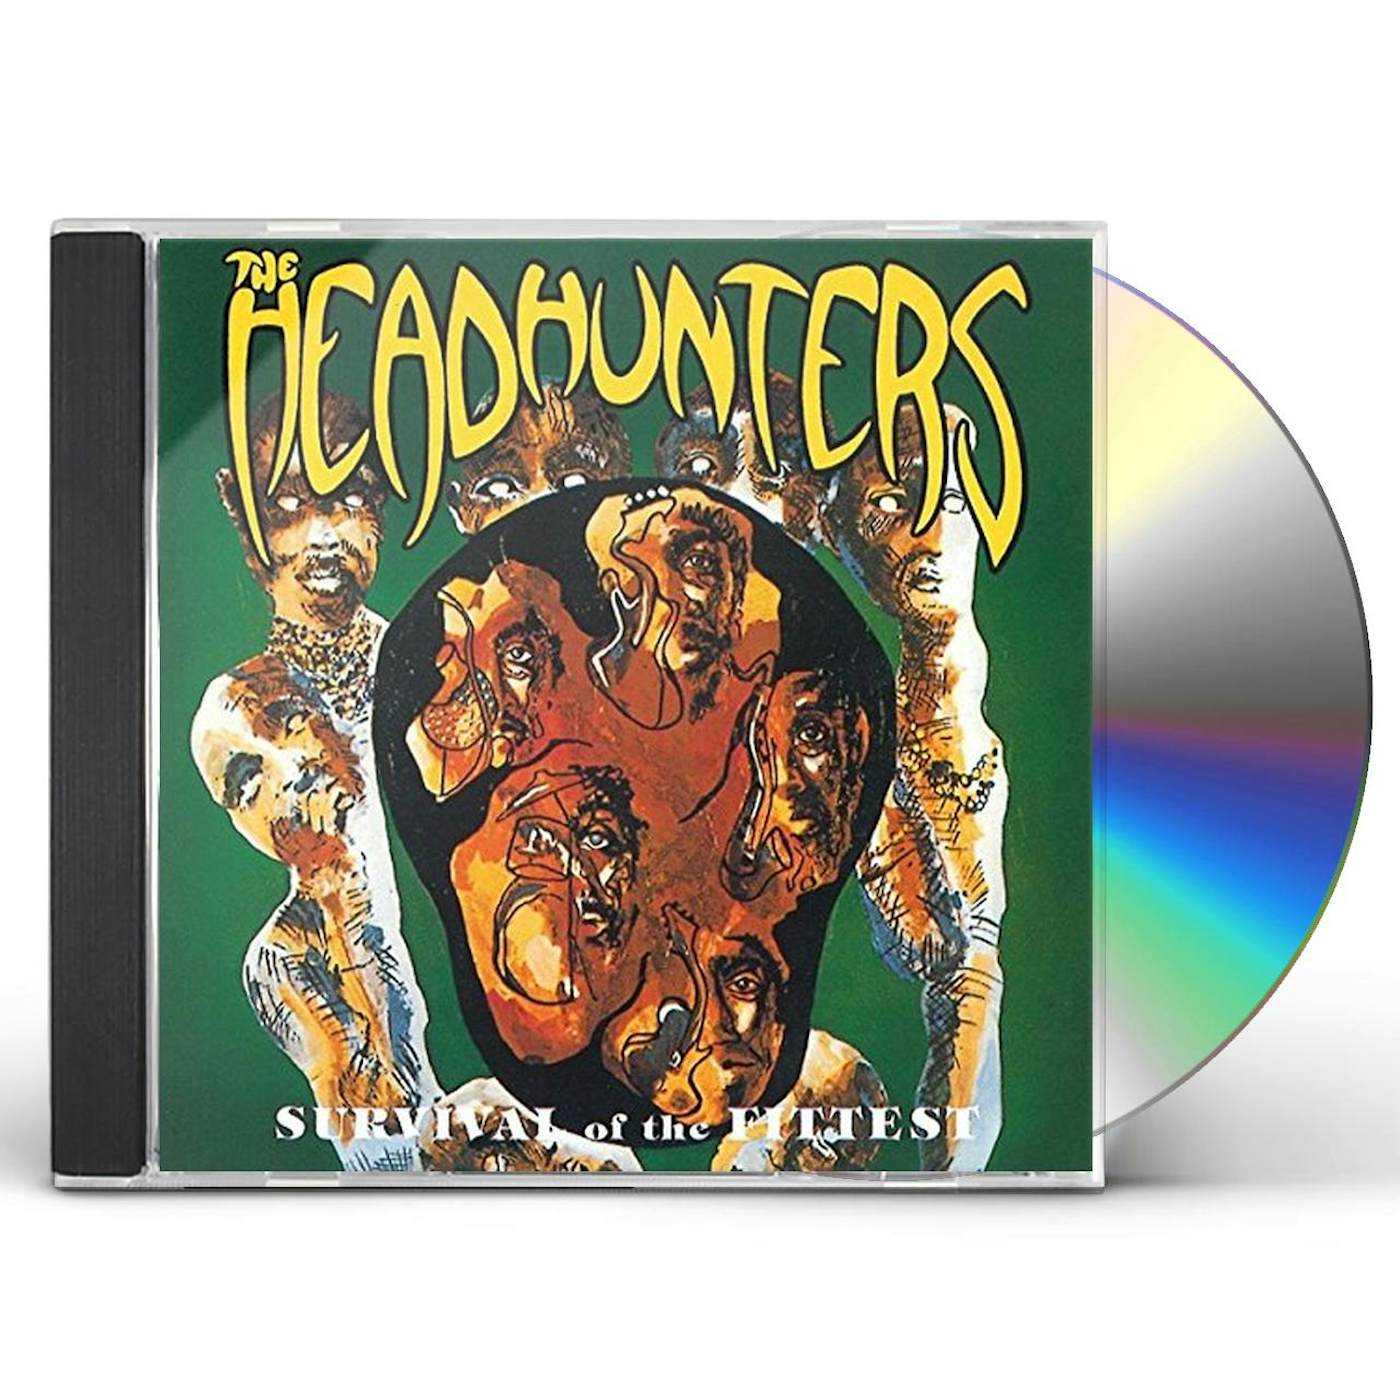 Headhunters SURVIVAL OF THE FITTEST CD